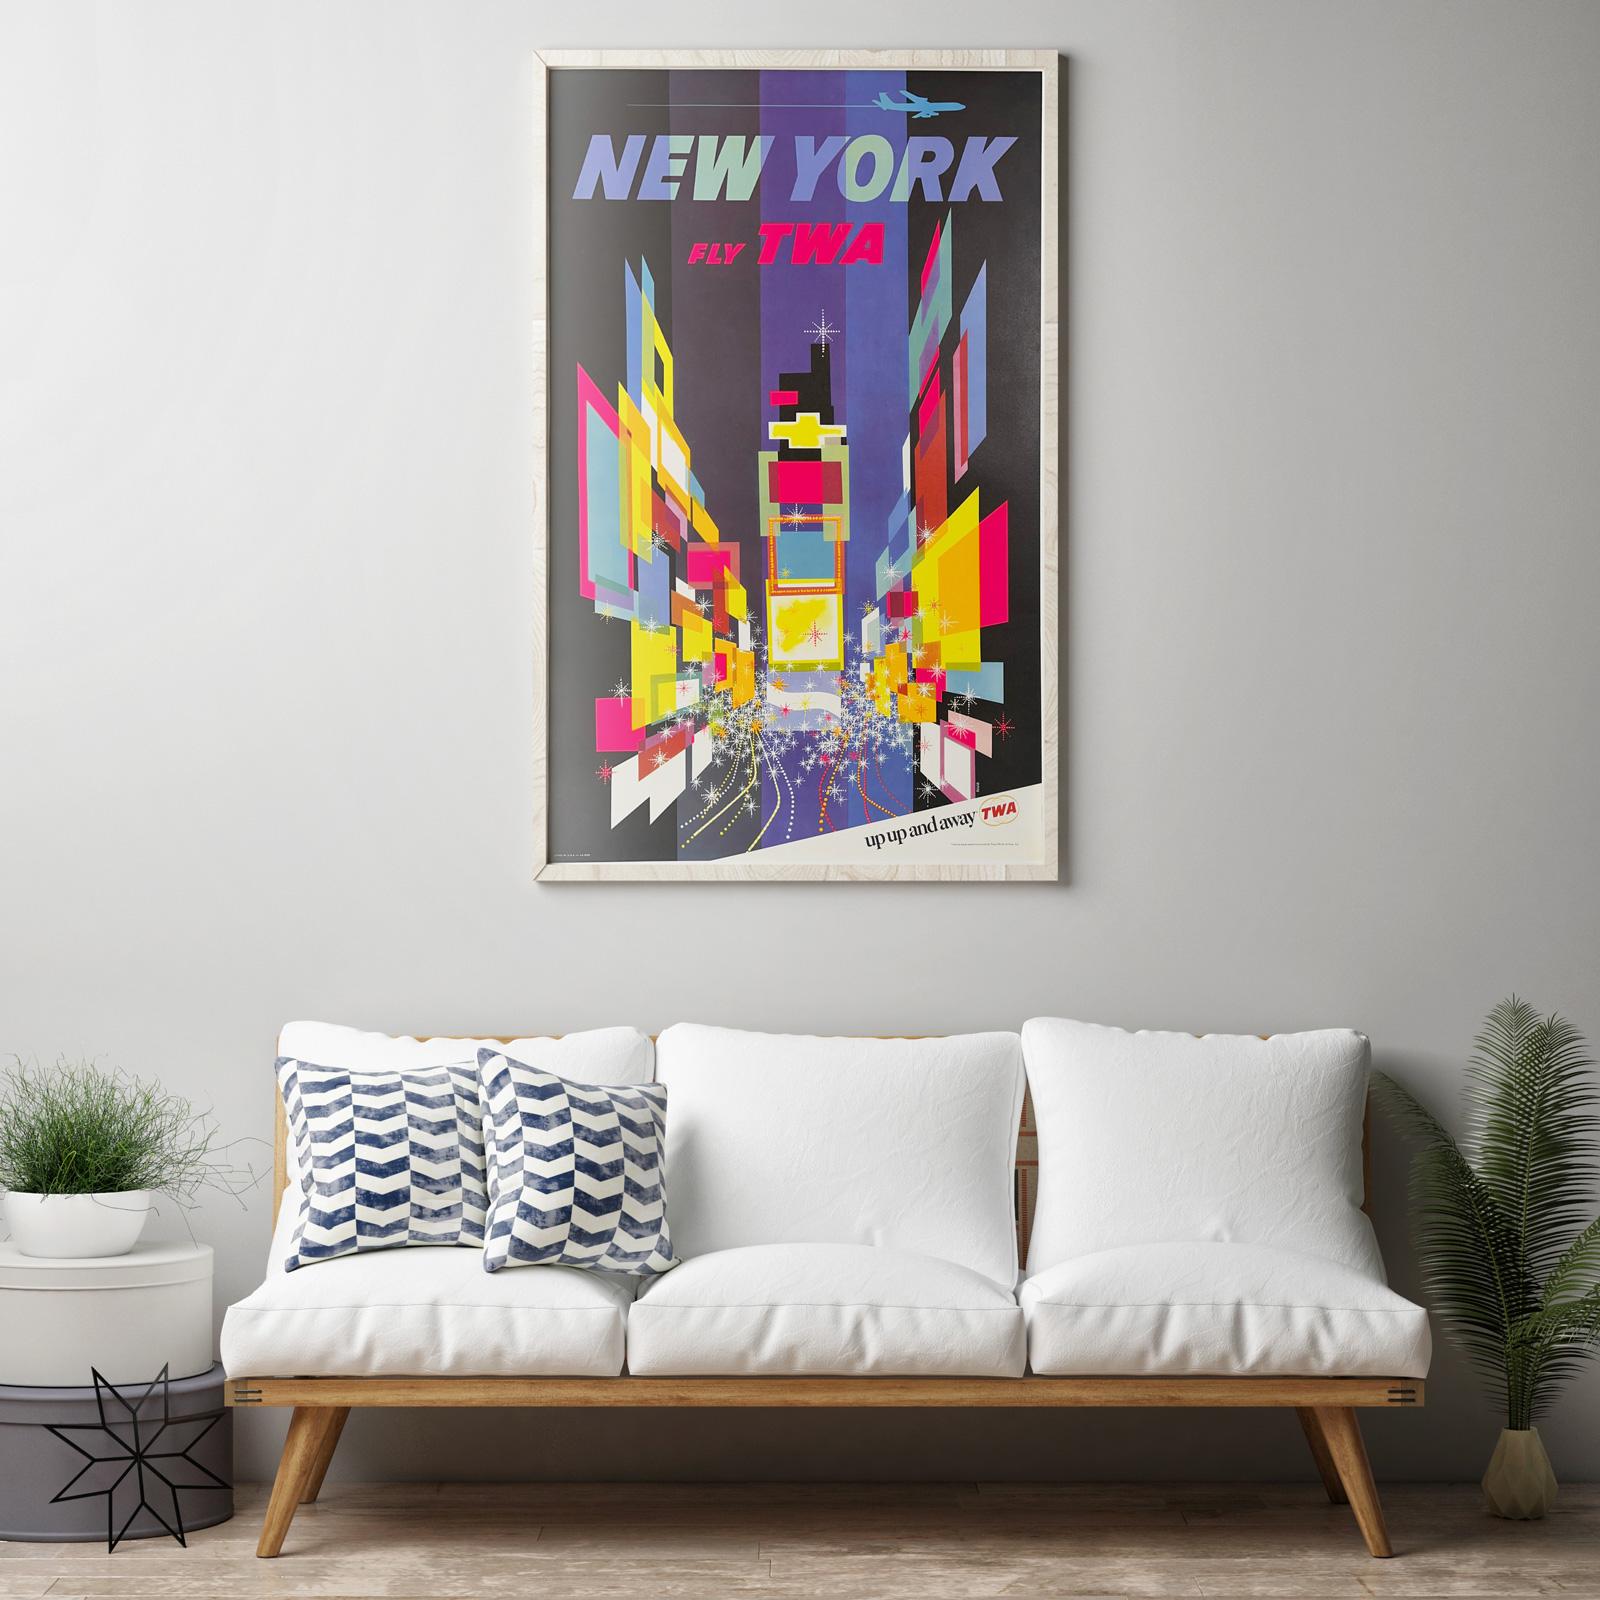 We adore this original 1960s TWA New York travel poster designed by David Klein. Klein's depiction of Times Square with wonderfully bright and eye-popping colours is simplky stunning. Understandably one of his the artist's most famous and